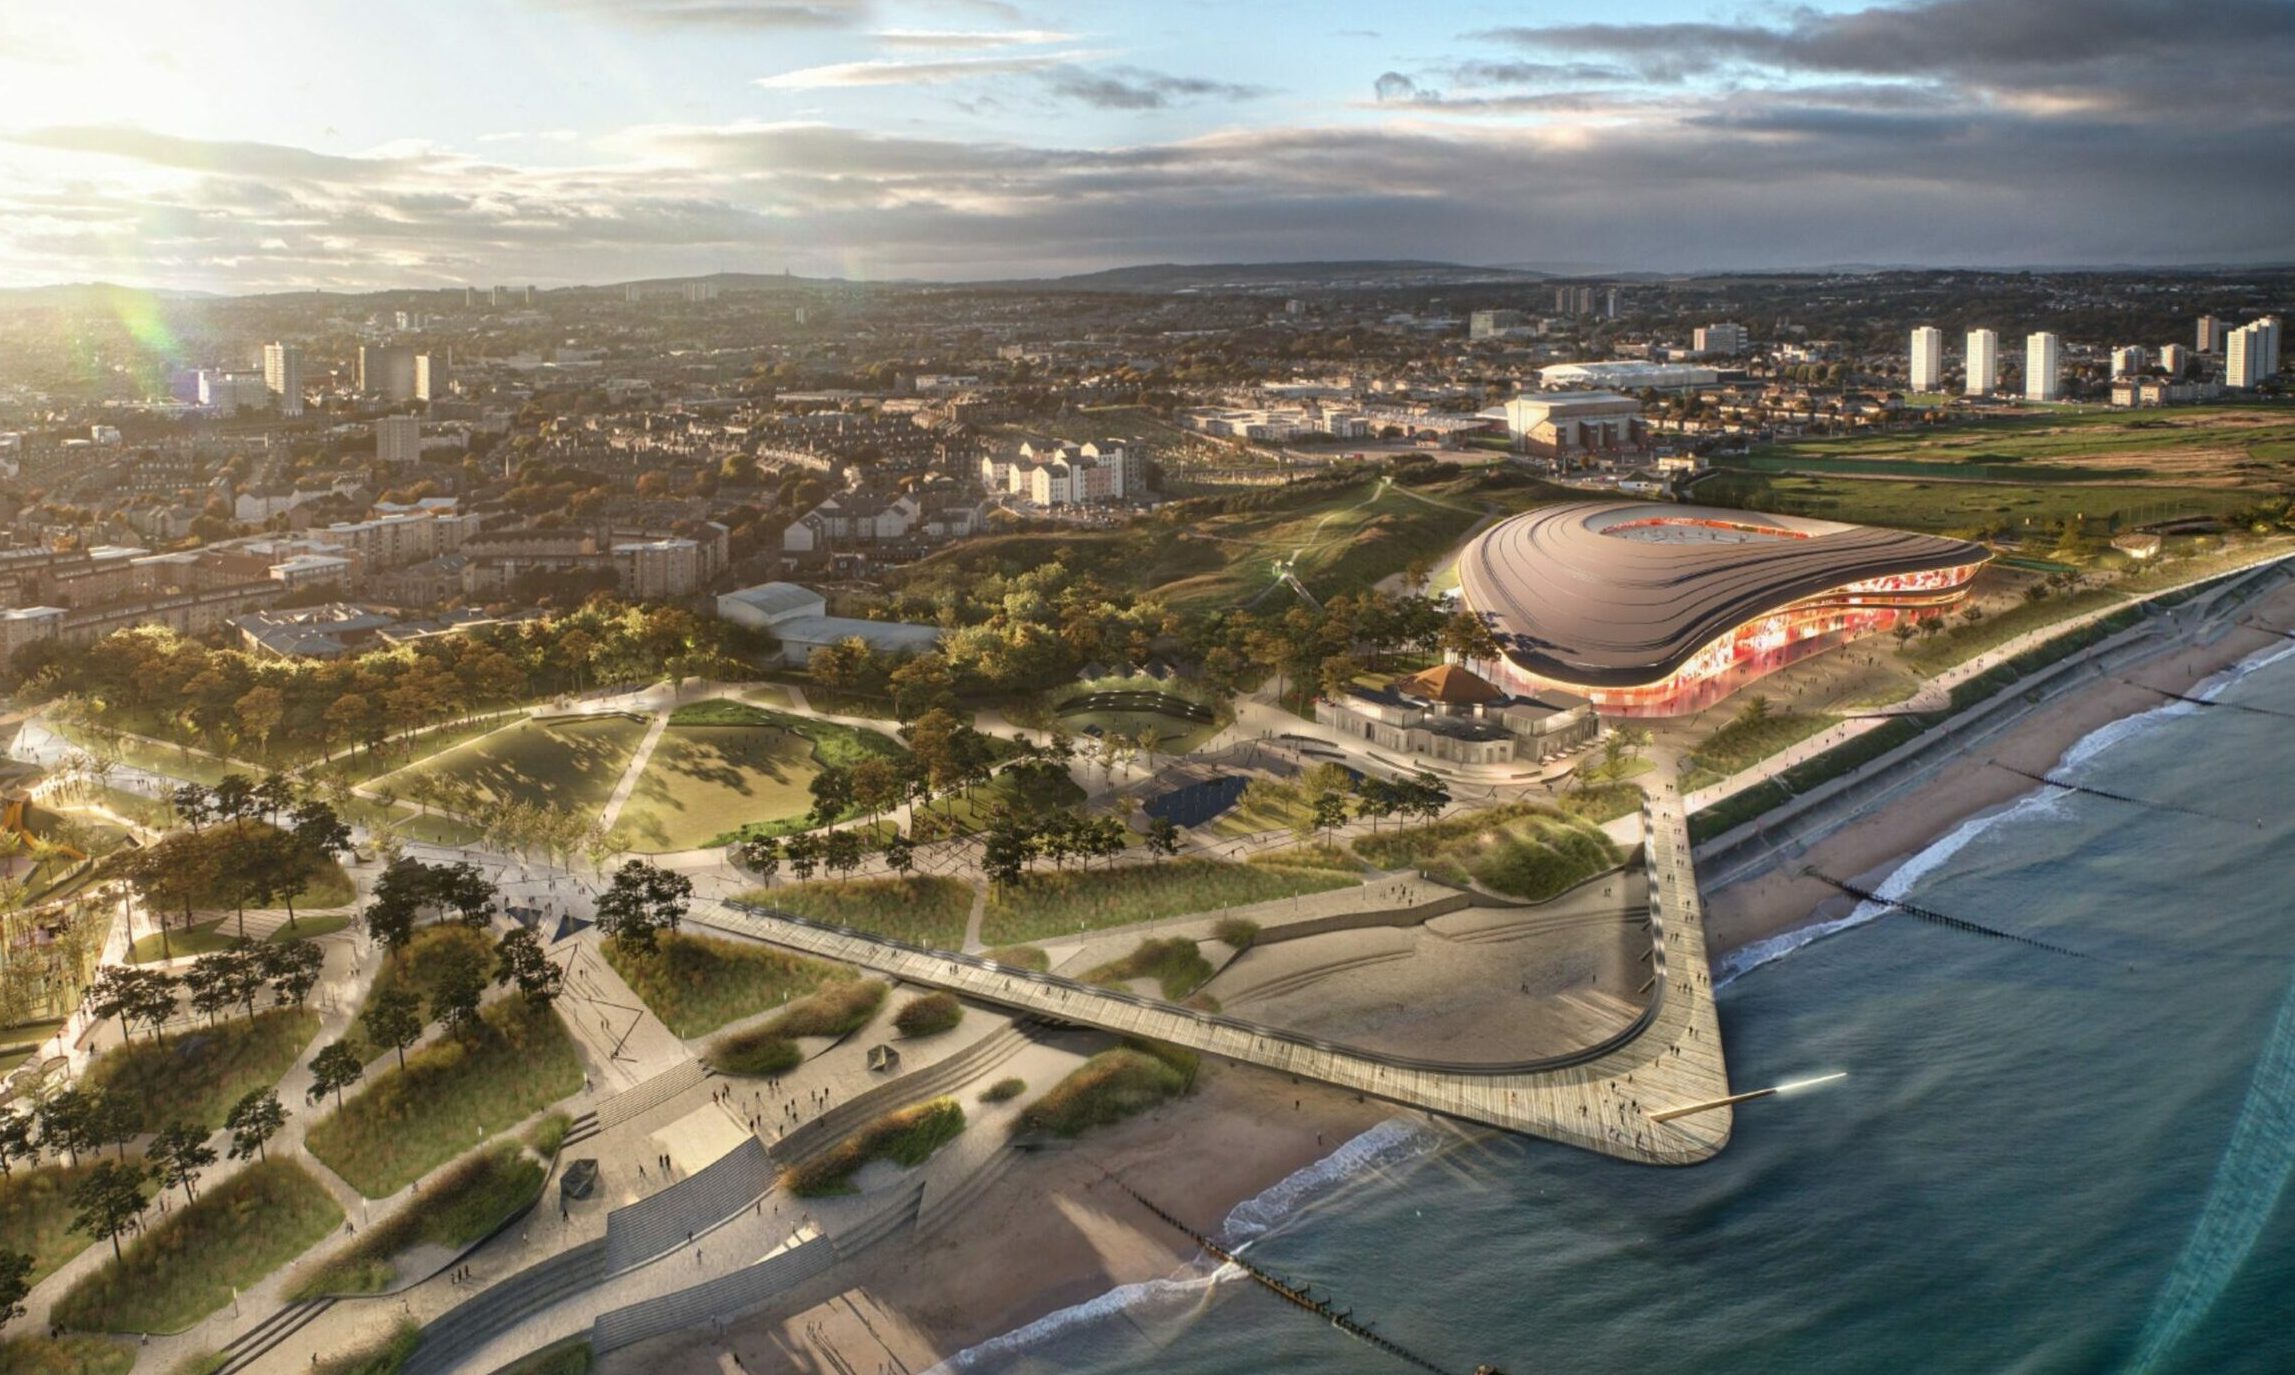 An impression of how the Aberdeen beach masterplan could look when finished